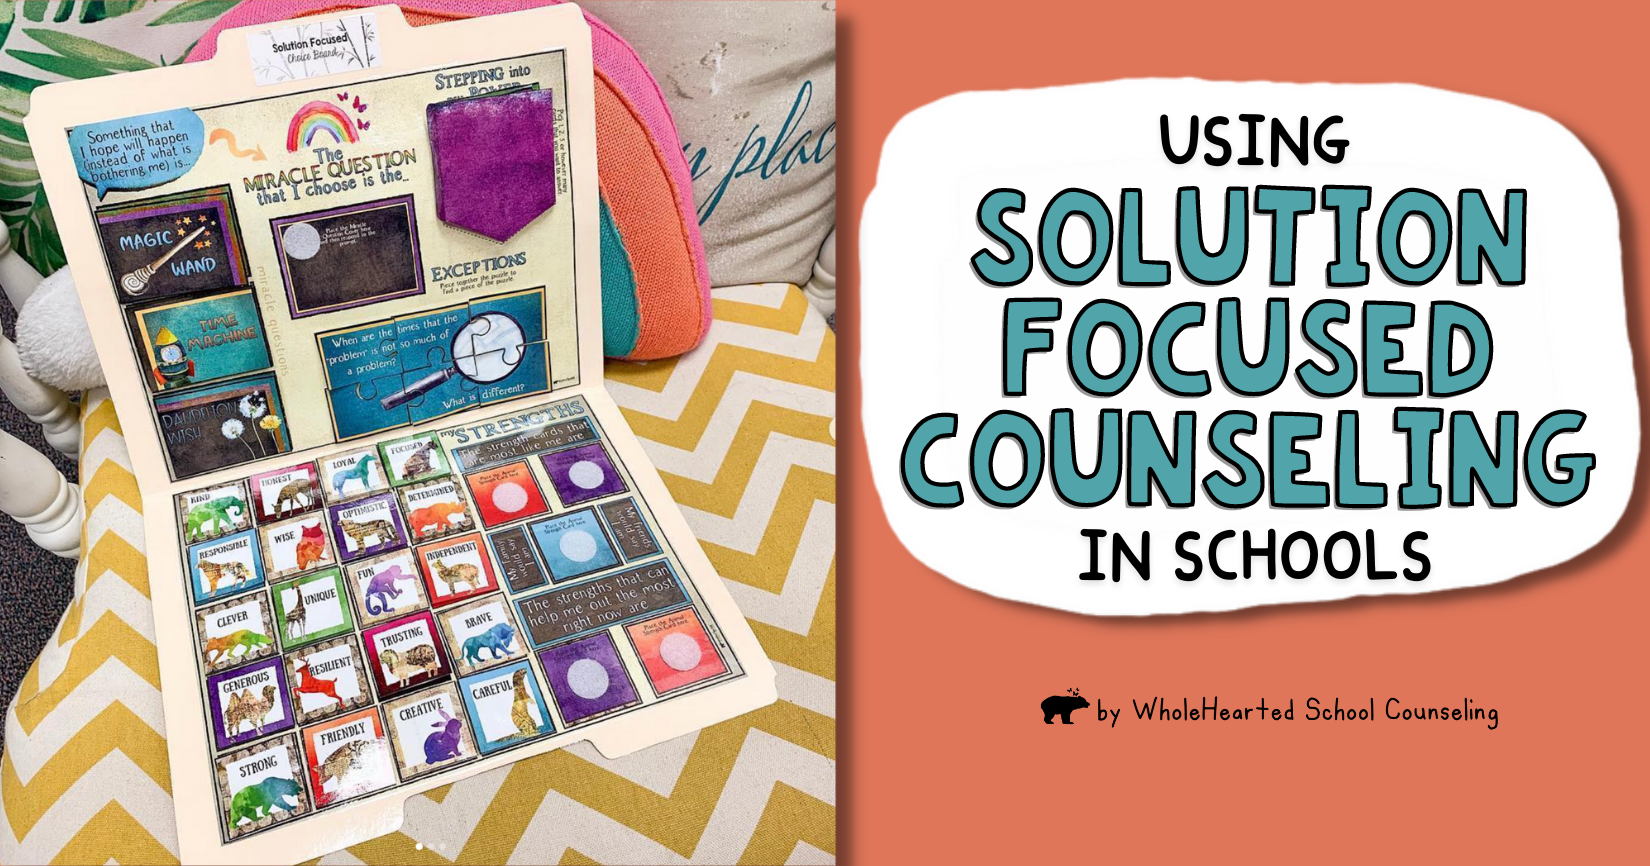 Solution Focused Counseling in Schools with Students